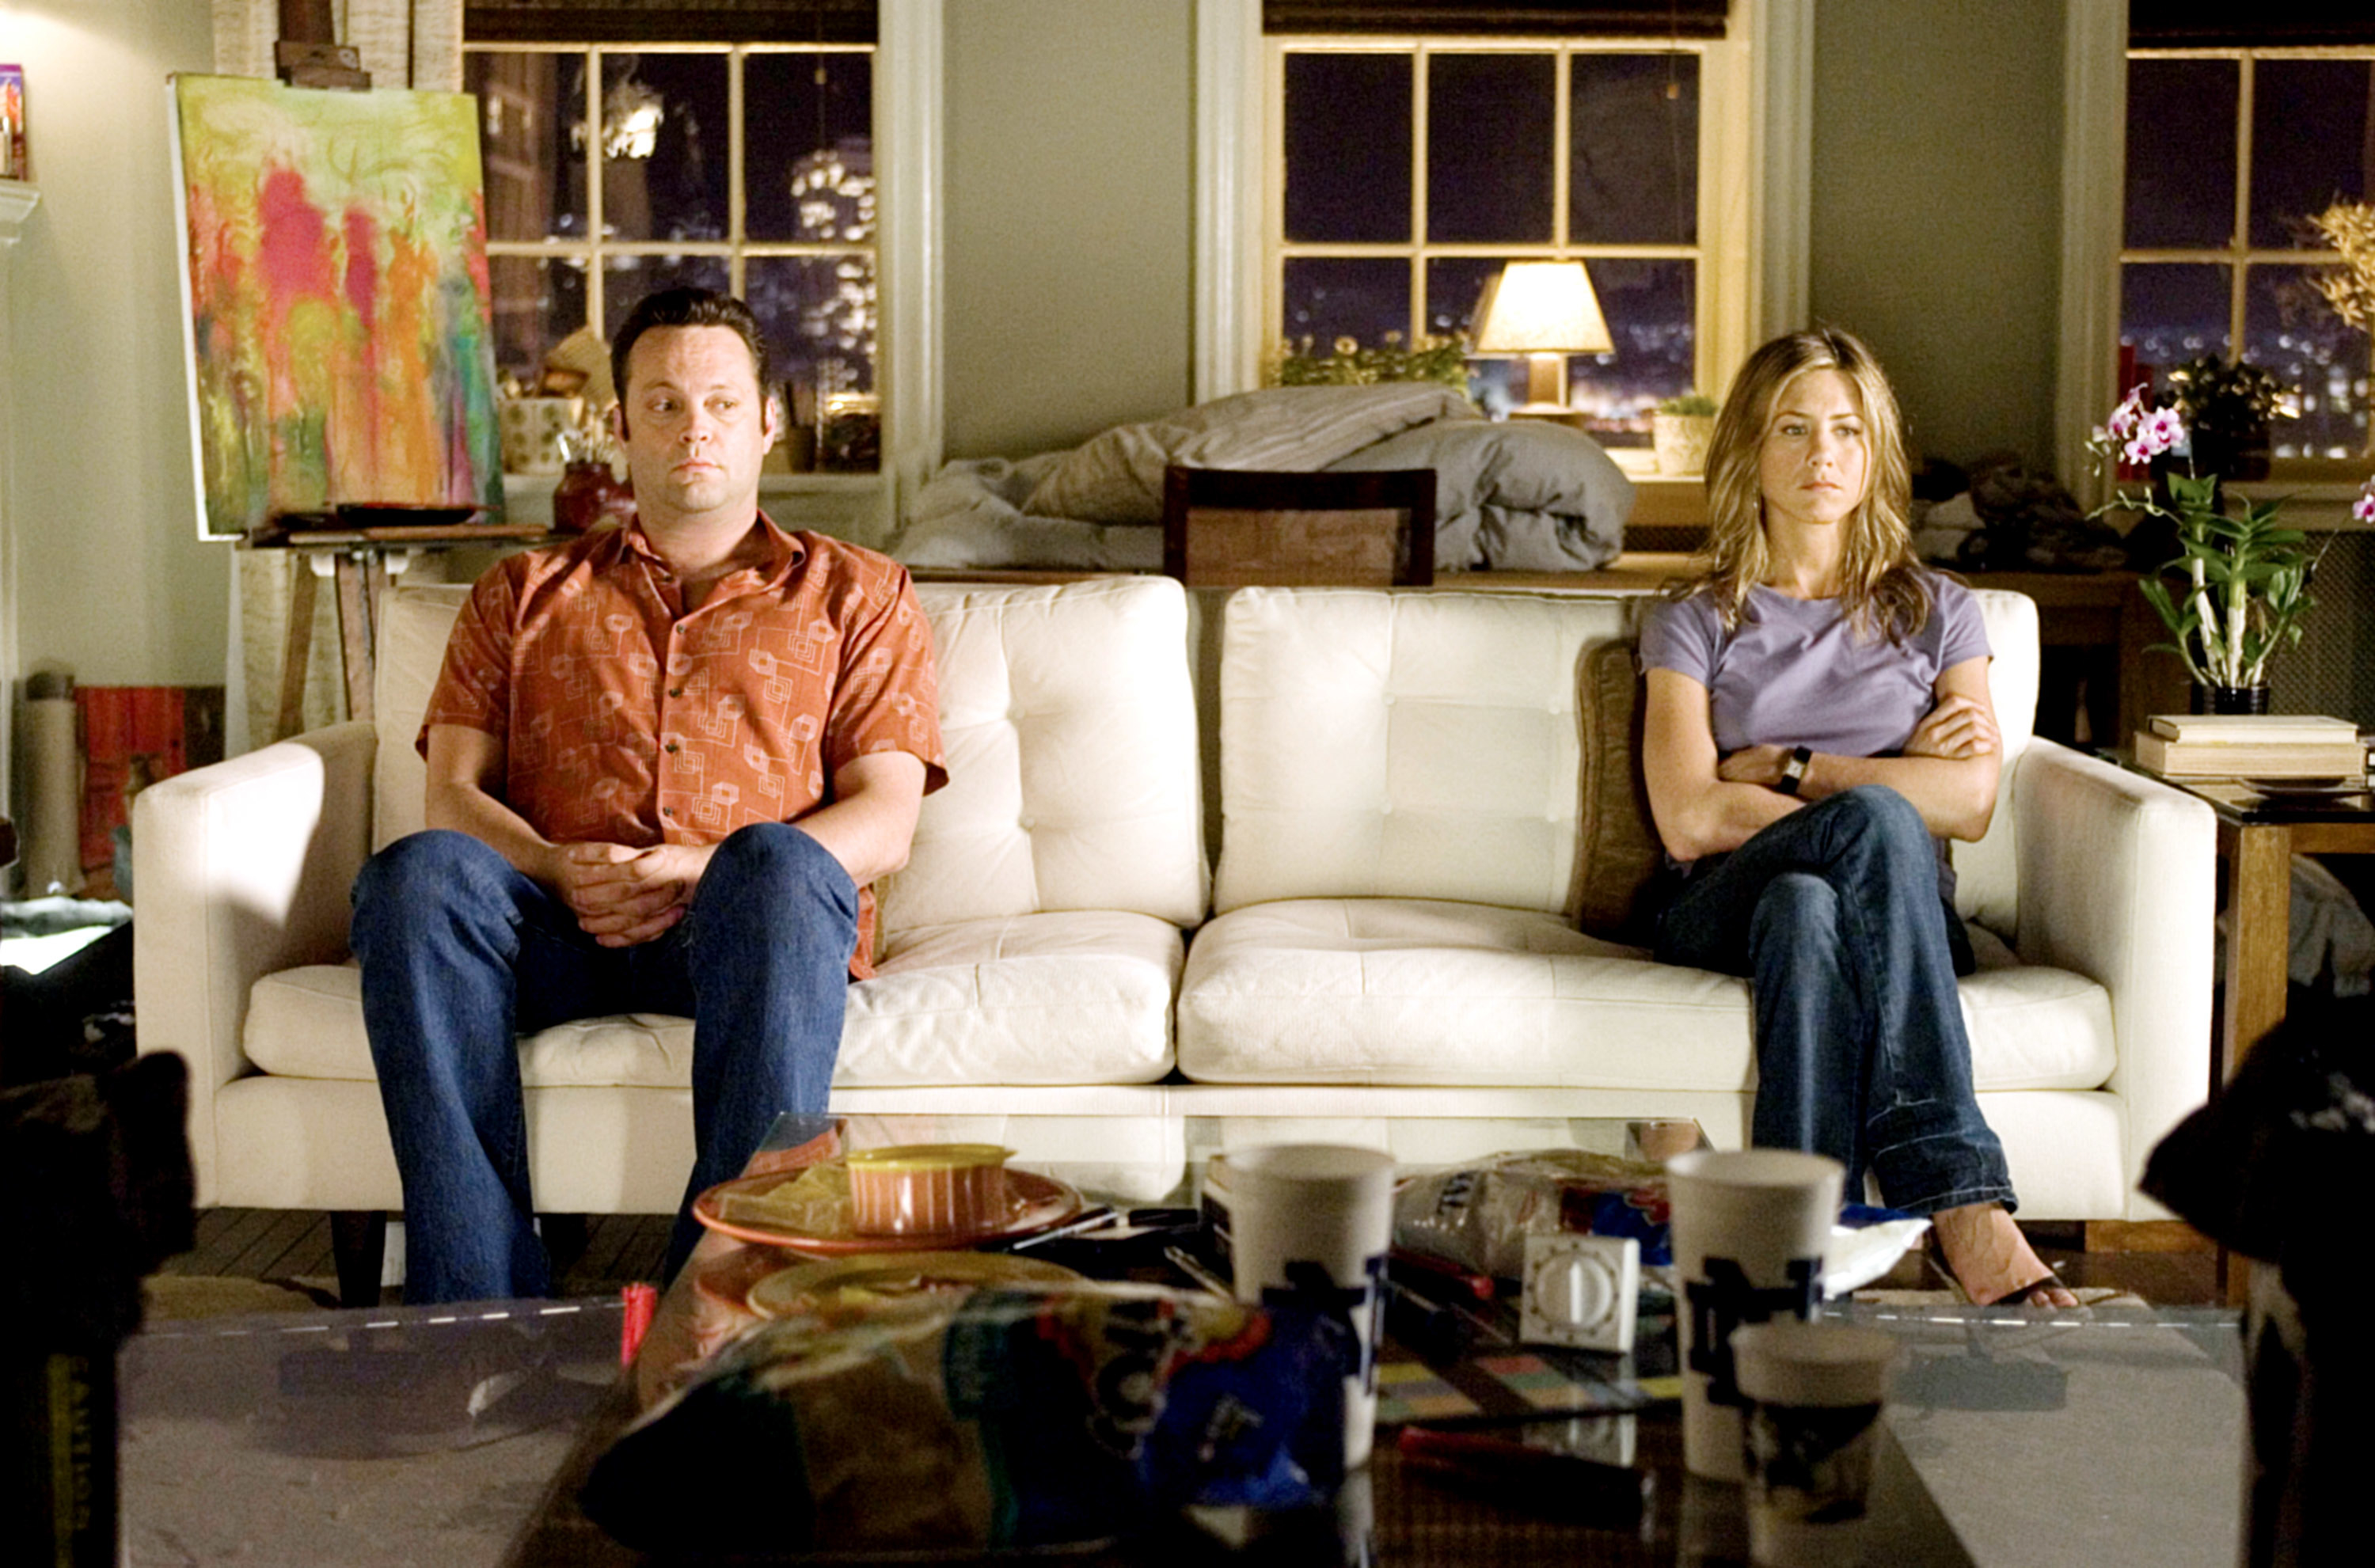 Vince Vaughn in a casual shirt and jeans, and Jennifer Aniston in a casual top and jeans, are sitting on a couch in a living room, appearing distant from each other